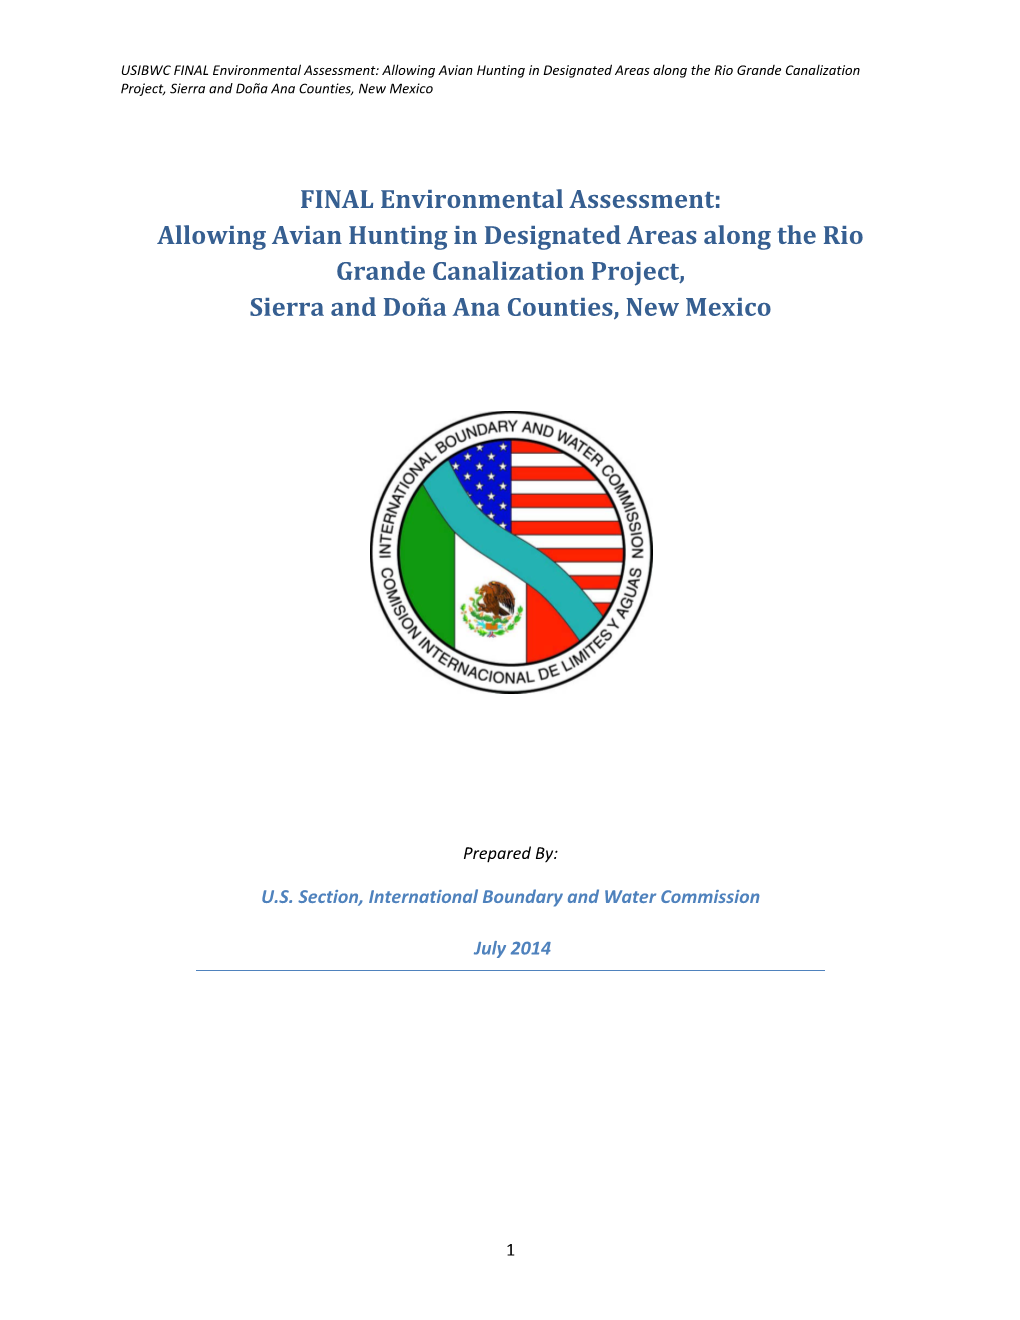 FINAL Environmental Assessment: Allowing Avian Hunting in Designated Areas Along the Rio Grande Canalization Project, Sierra and Doña Ana Counties, New Mexico